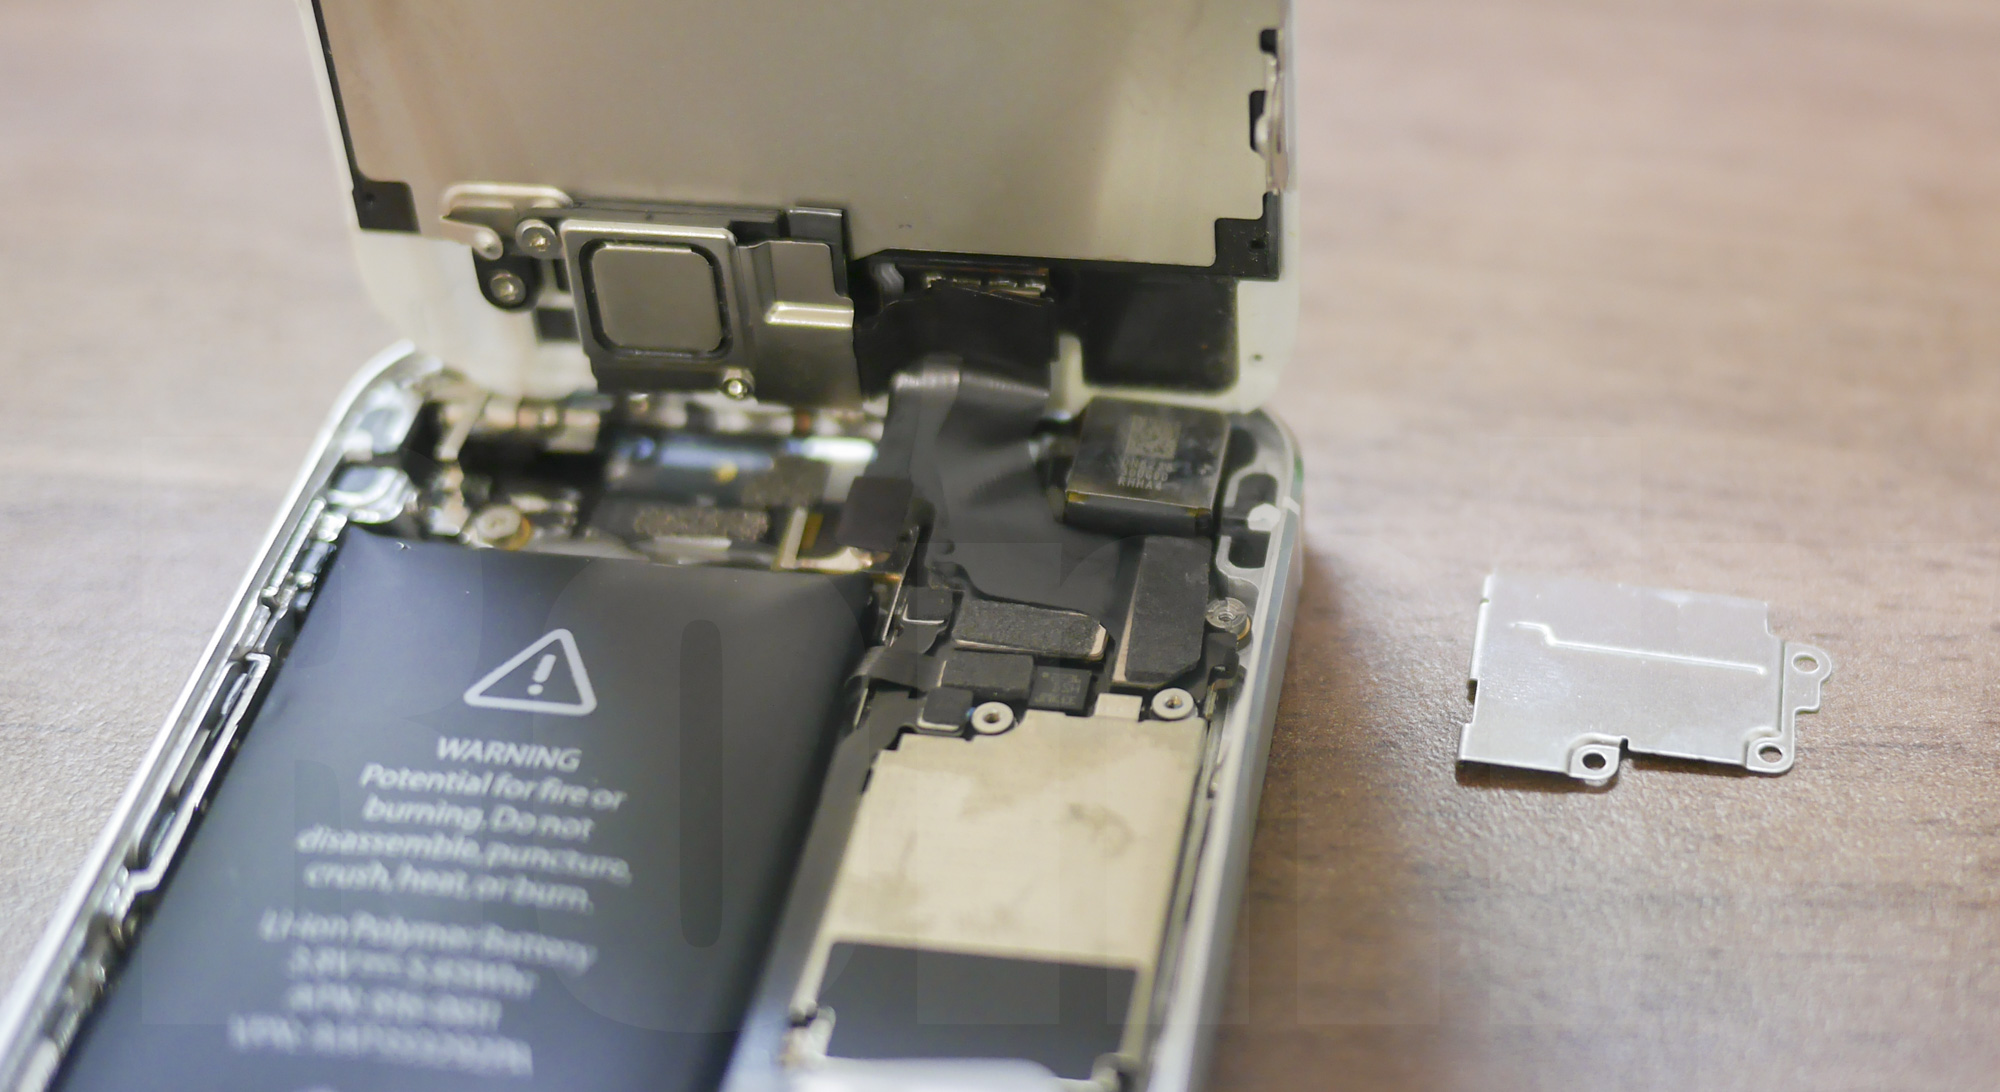 iPhone 5 Battery replacement: display connector cover is removed